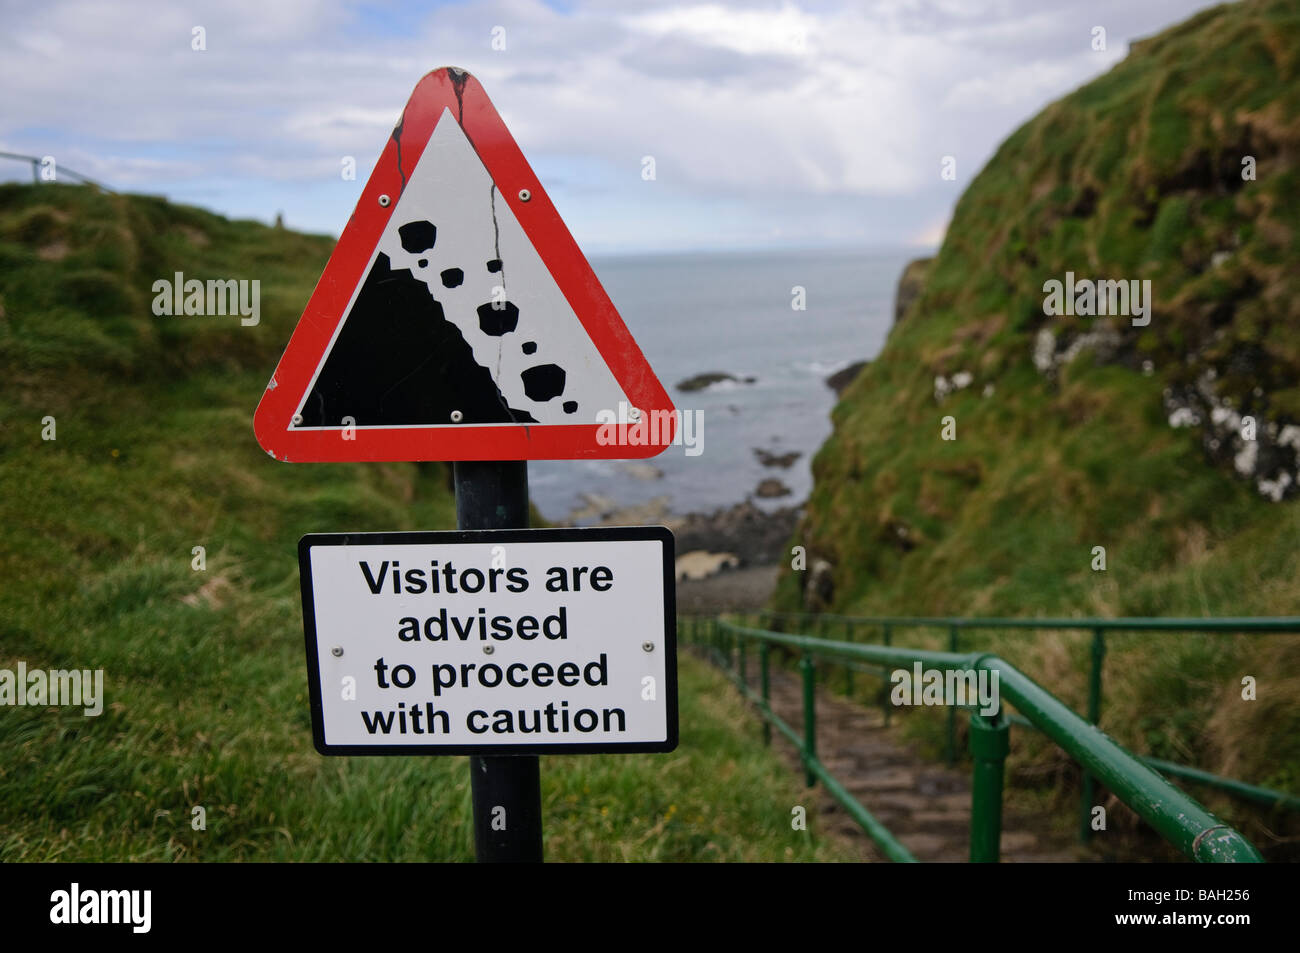 Falling rocks sign on a path beside a seaside cliff warning 'Visitors are advised to proceed with caution' Stock Photo